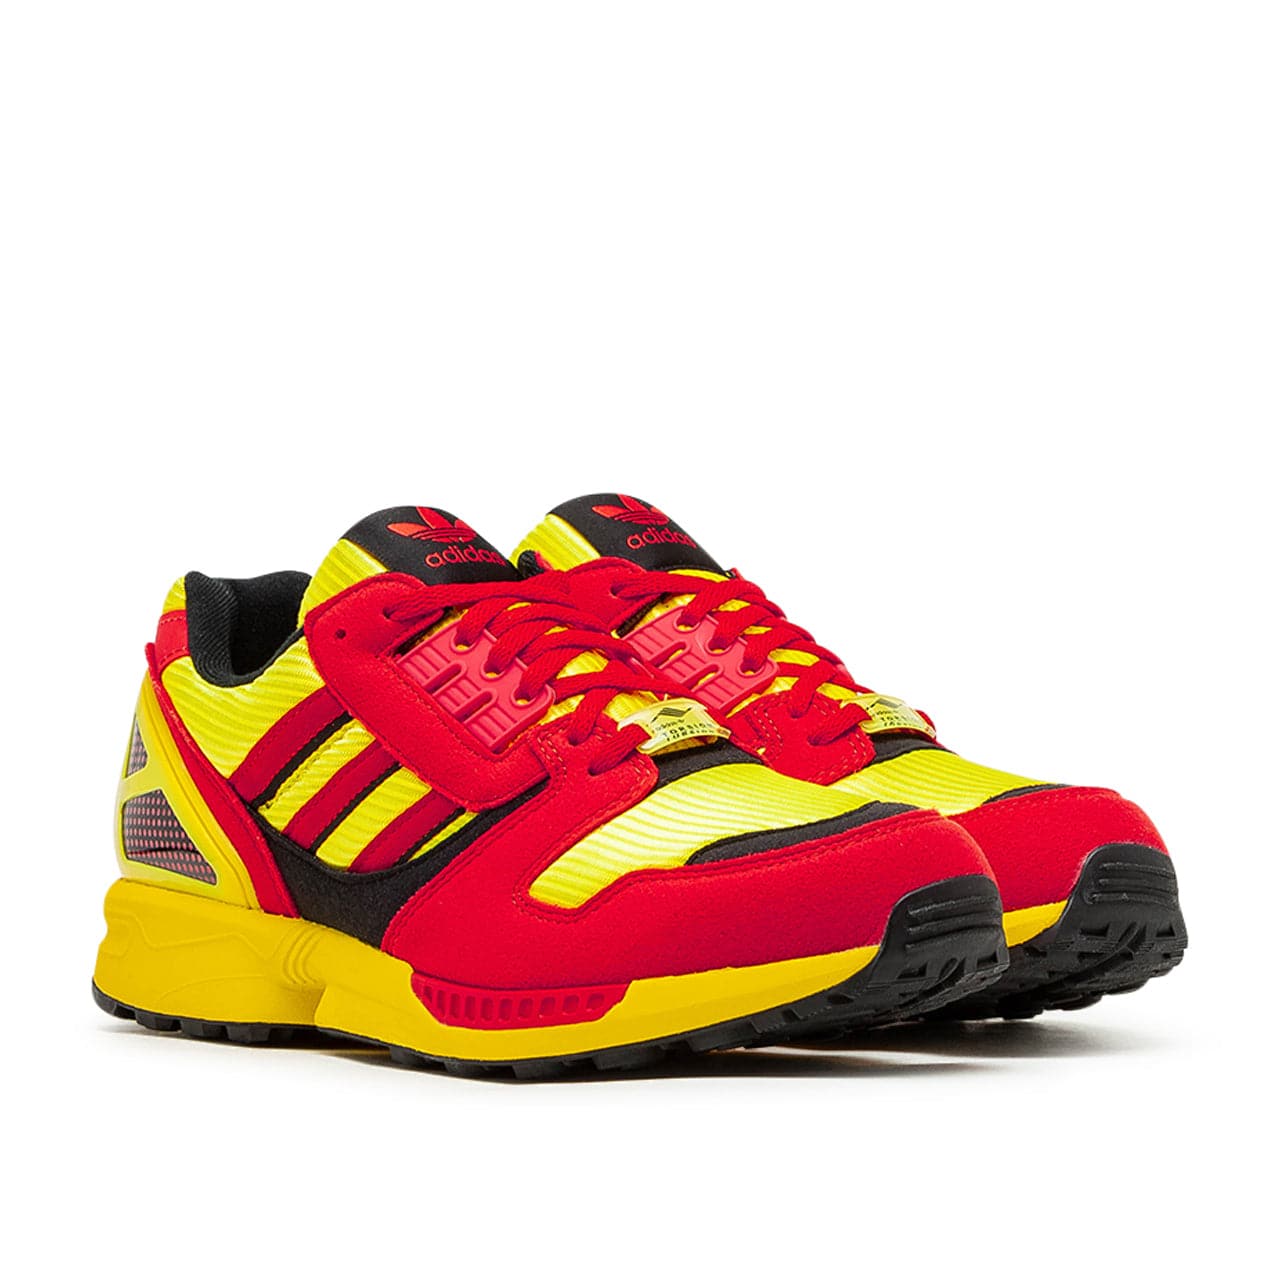 adidas ZX 8000 Germany 'Bring Back Pack' (Yellow / Red / Black)